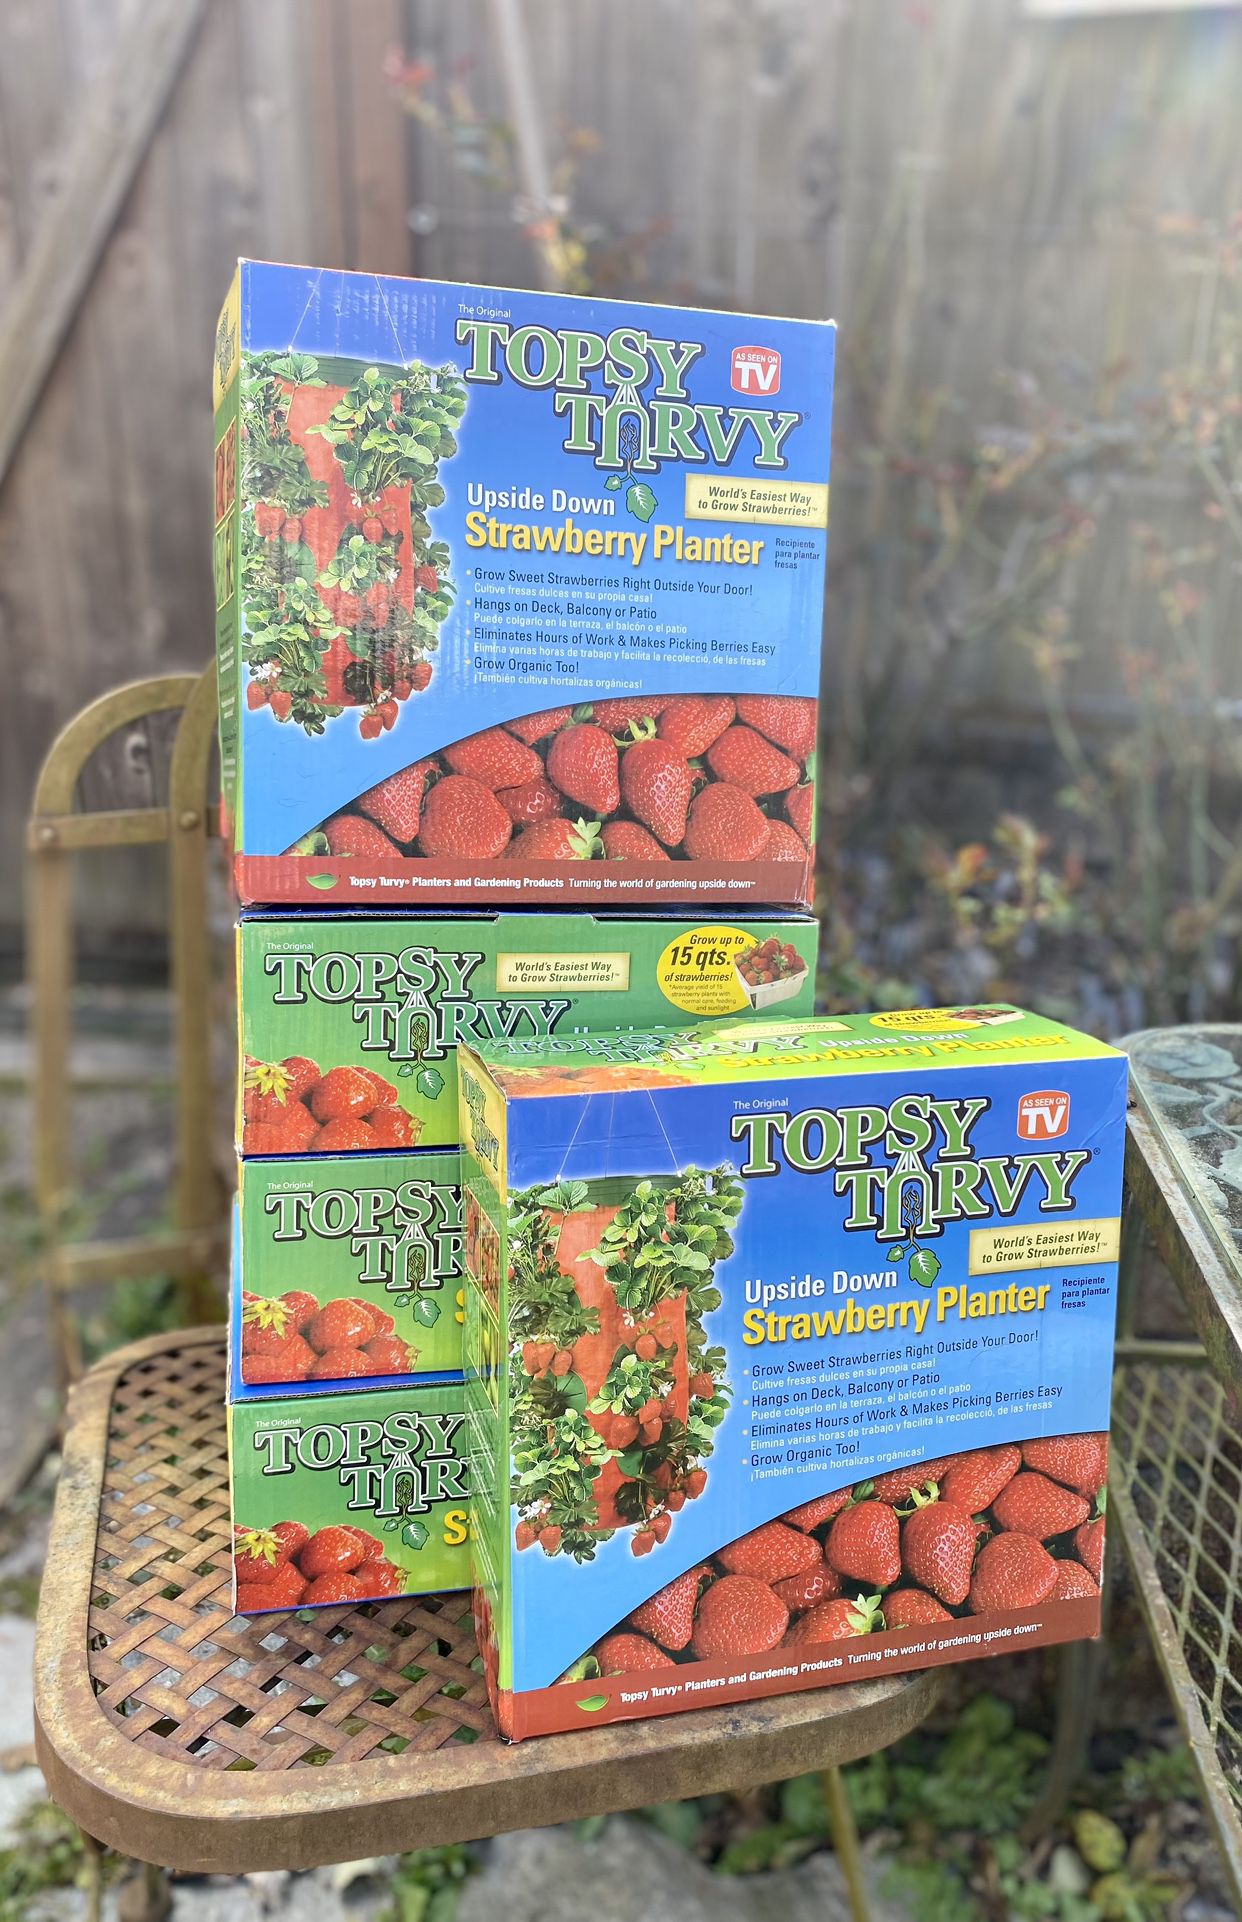 Lot sale! 8- Topsy Turvy Upside Down Strawberry Planters - Brand New In Box! Get a great deal buying the lot!